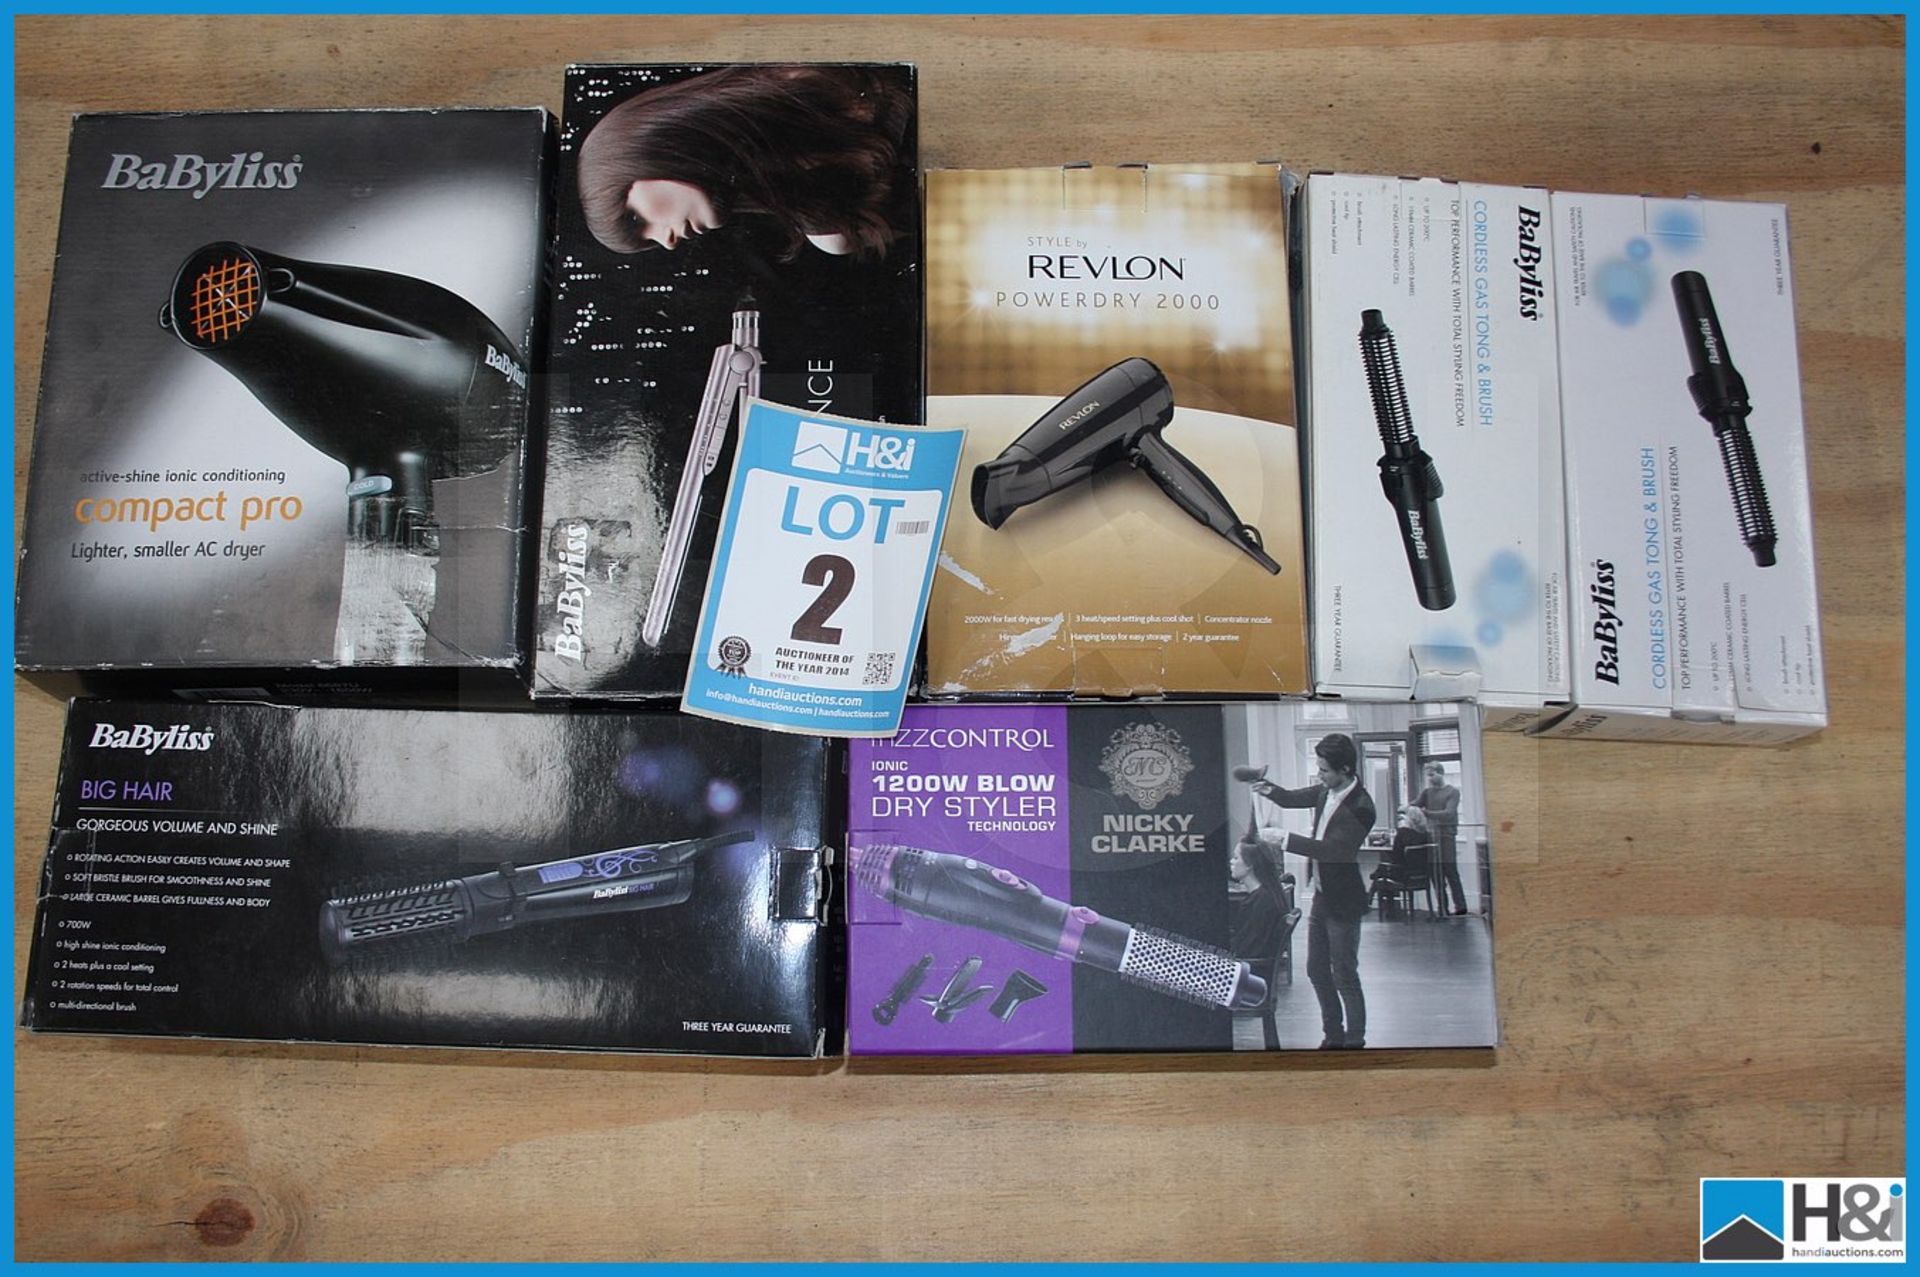 7 off hair care products including Babyliss, Revlon and Nicky Clarke. Untested, raw return